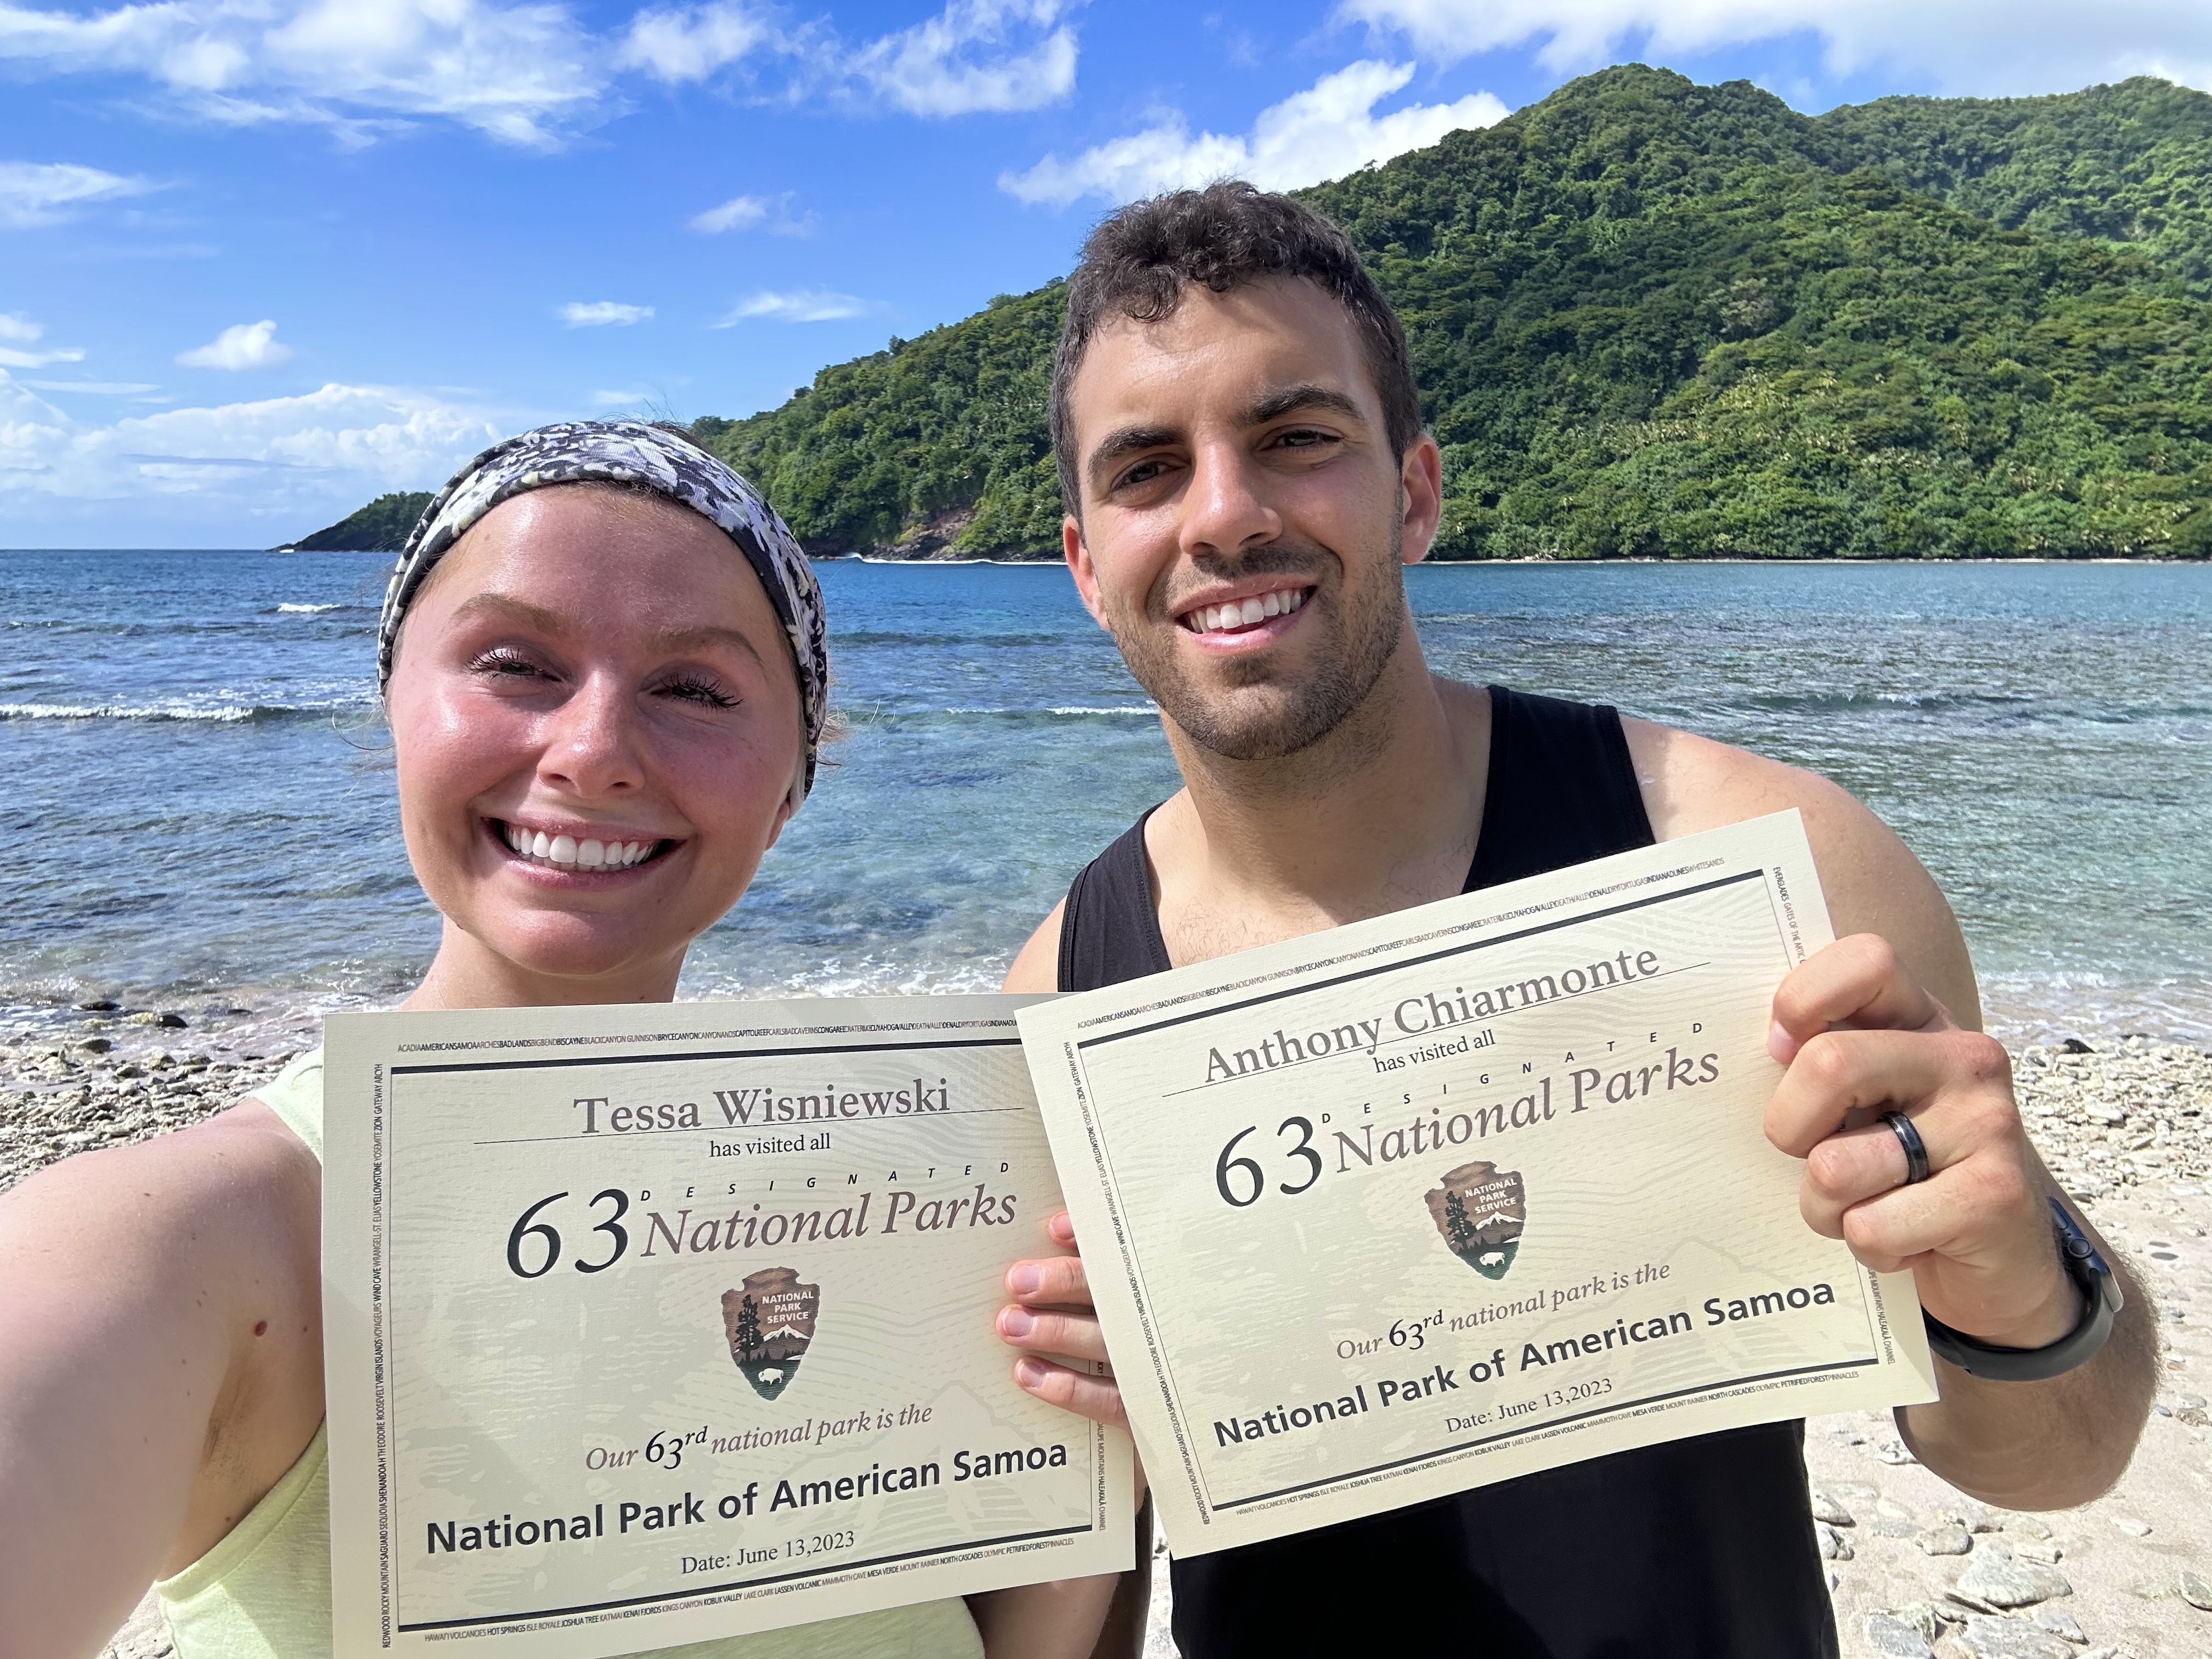 Tessa Wisniewski鈥�17, 鈥�19 and her husband holding up certificates that say 63 National Parks